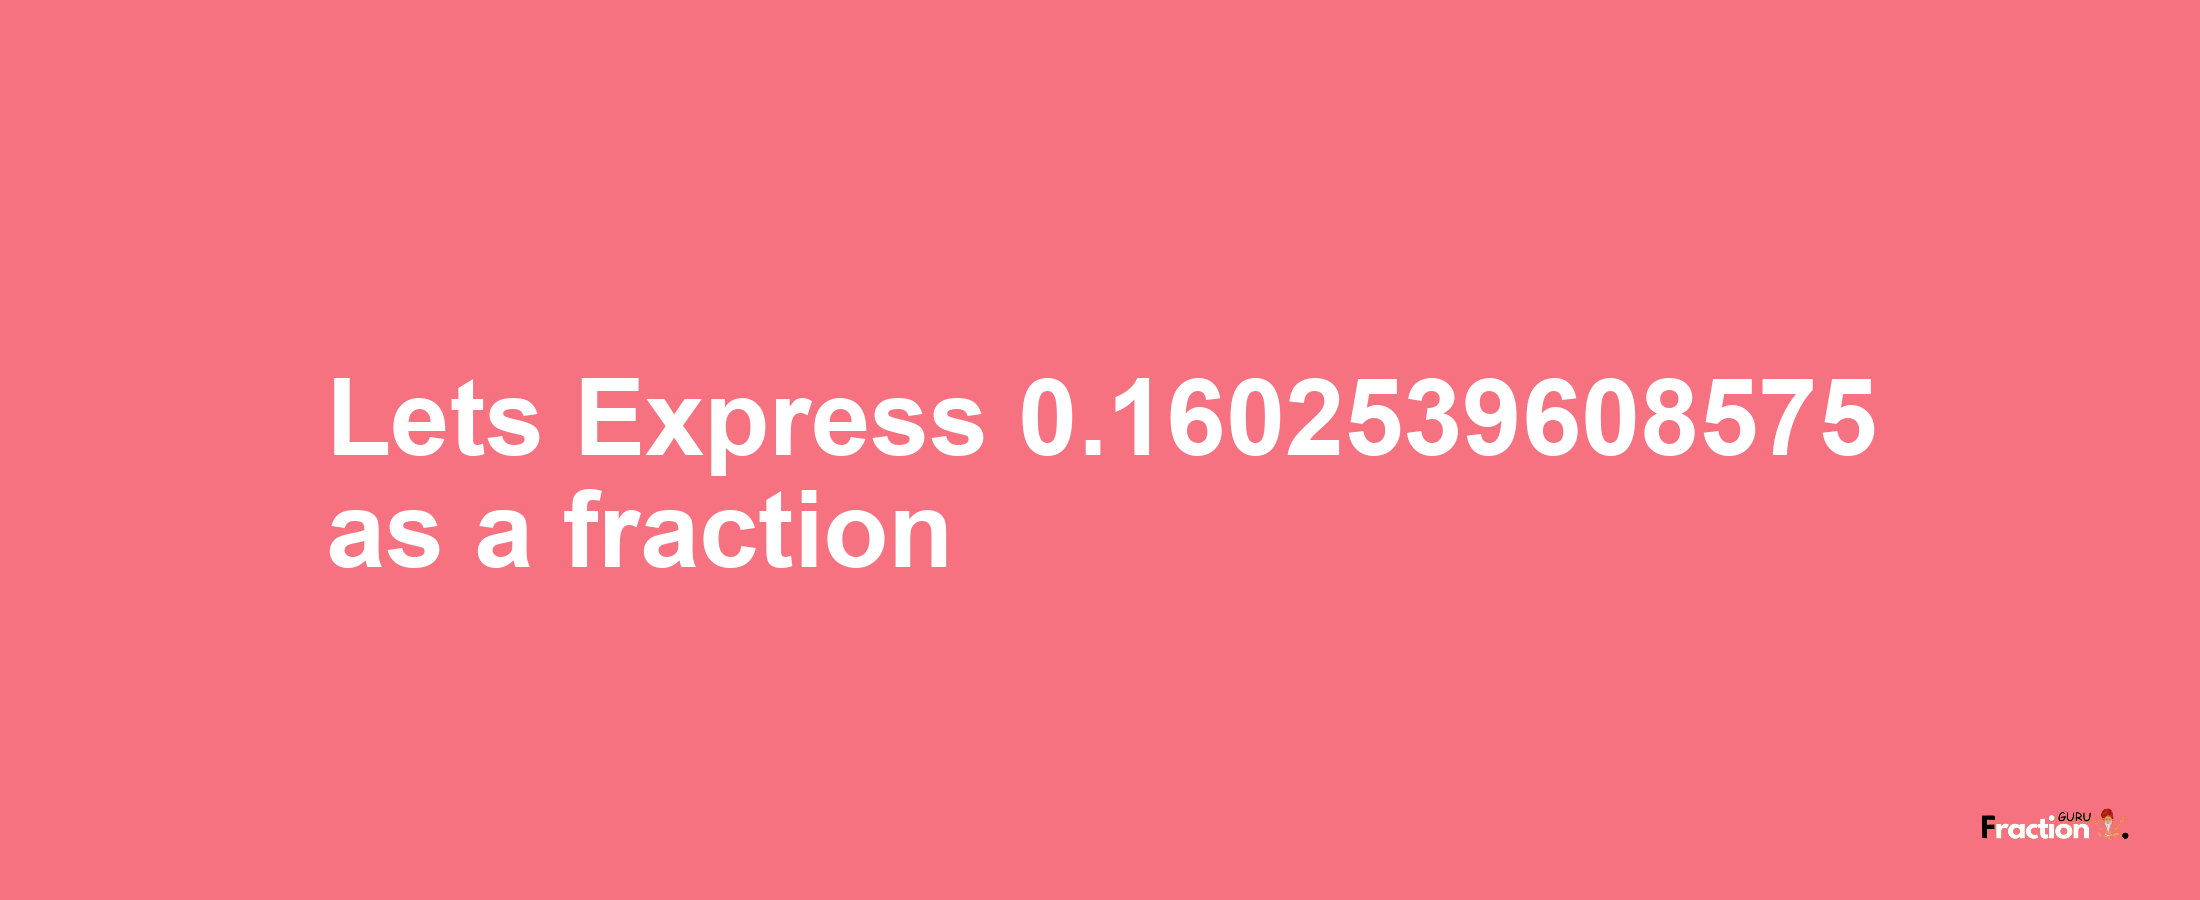 Lets Express 0.1602539608575 as afraction